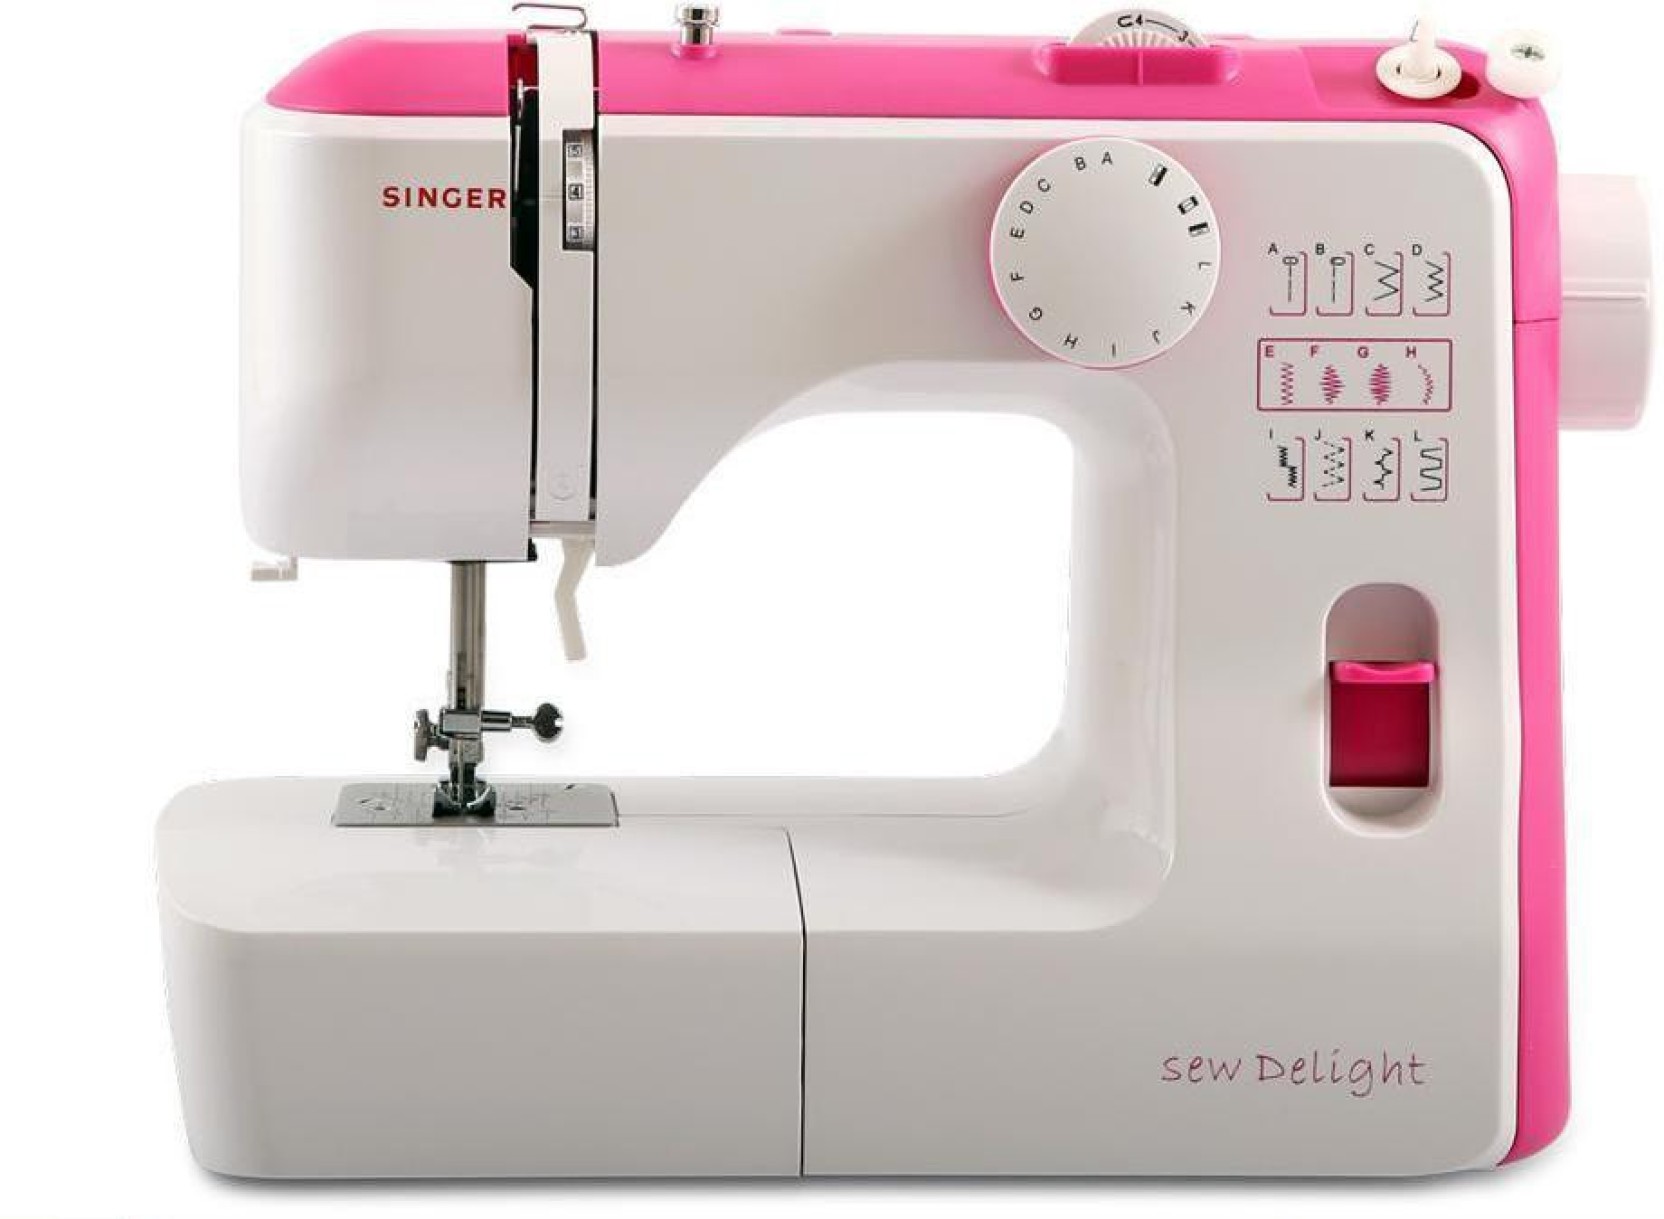 One Size Singer Sewing Machine Pink